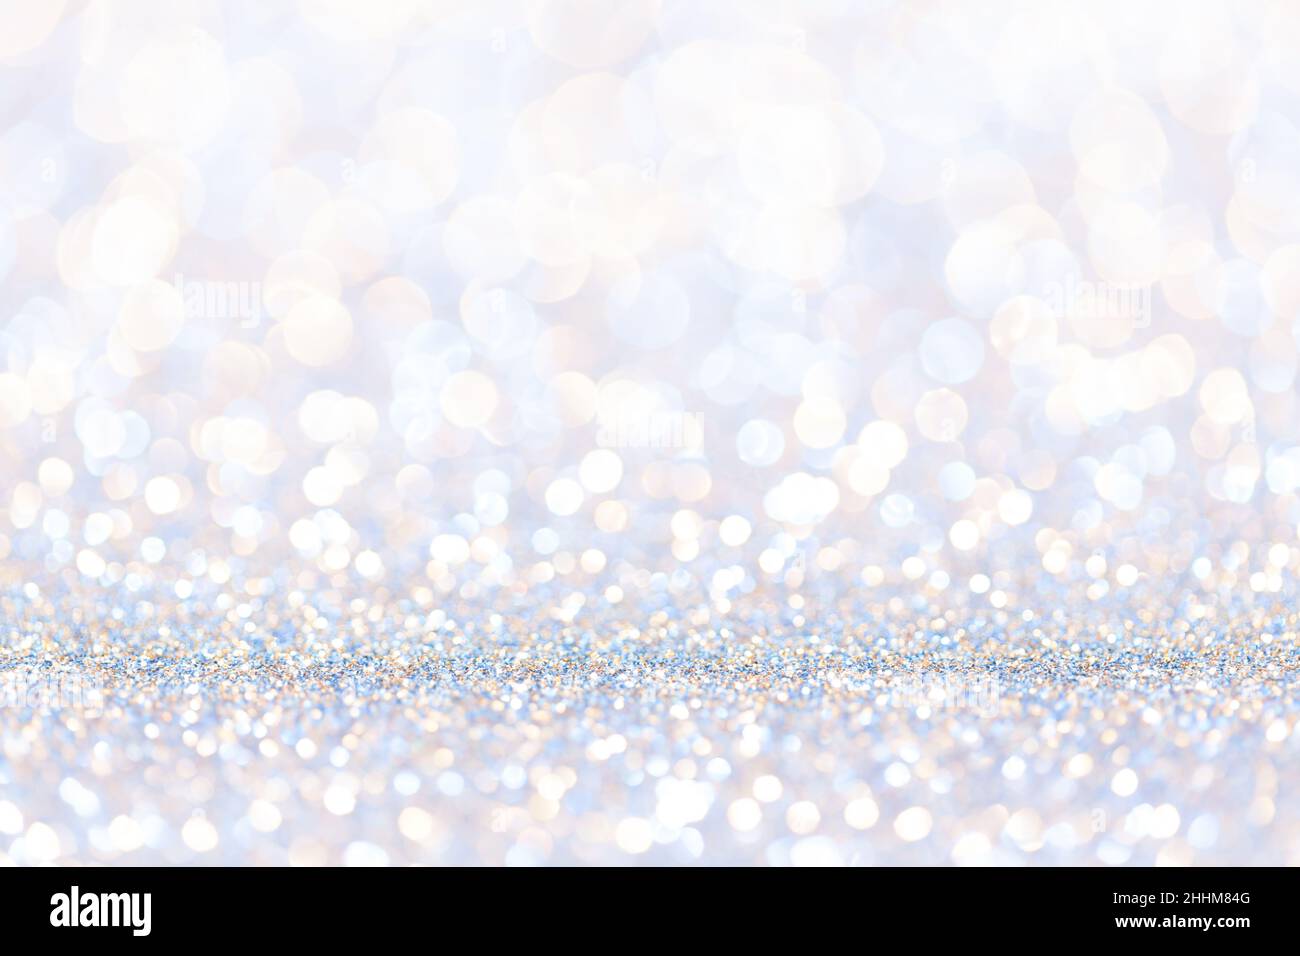 Blurred defocused multi color lights background. Copy Space, concept Stock Photo